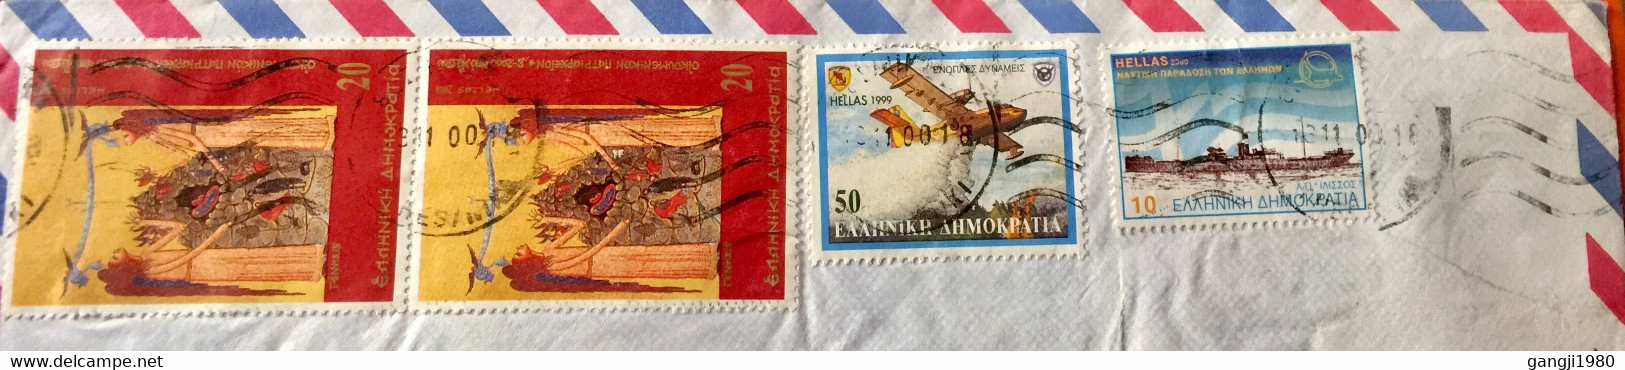 GREECE 2000, USED AIRMAIL COVER TO INDIA,4 STAMPS ,SHIP ,AEROPLANE,ART, PAINTING,WOMEN,GIRLS,THESSALONIKI,CANCELLATION - Cartas & Documentos